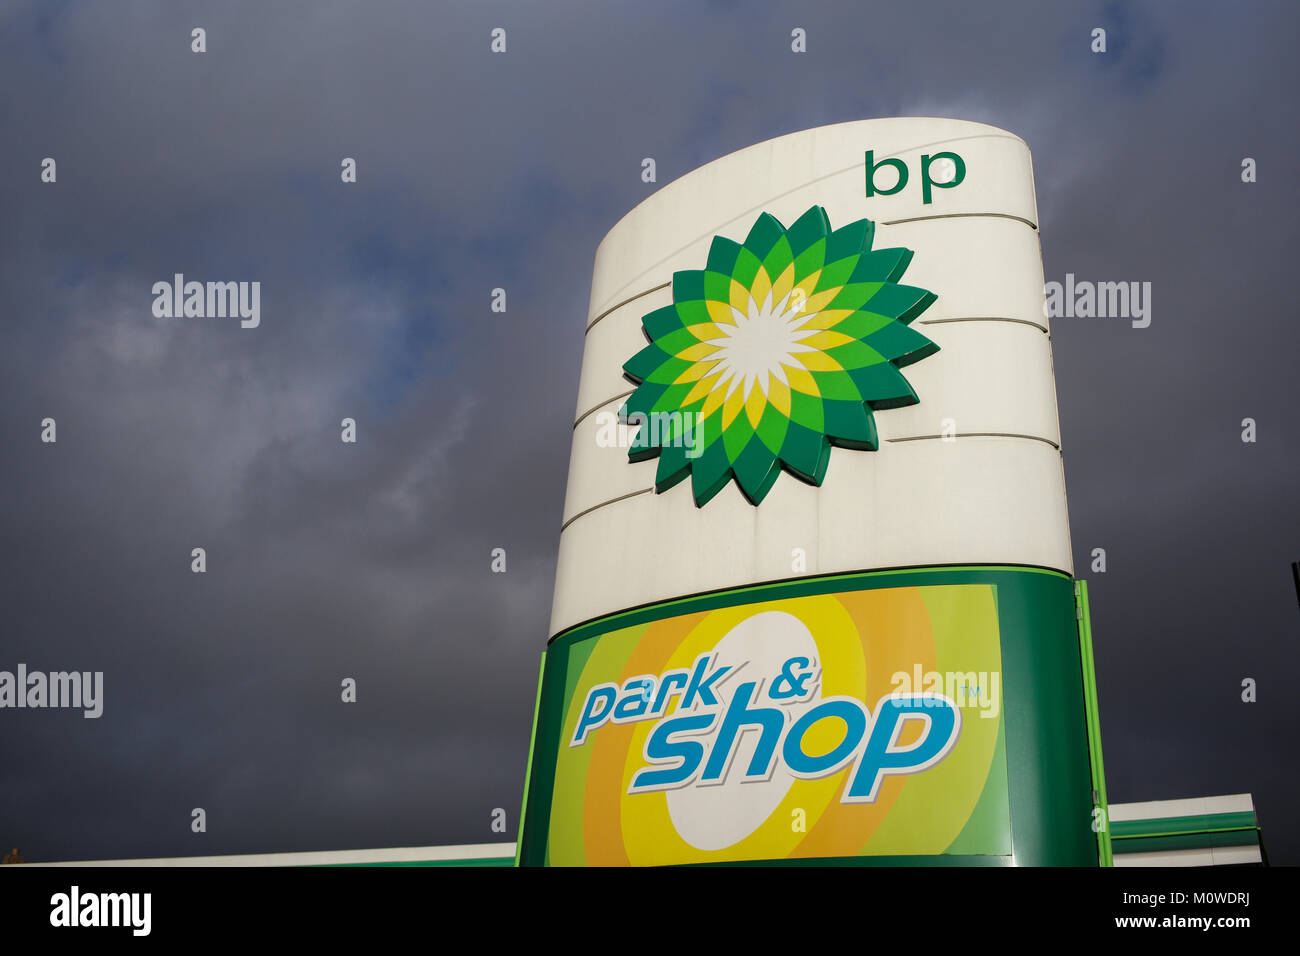 BP petrol garage sign with park and shop logo against a stormy sky. Stock Photo